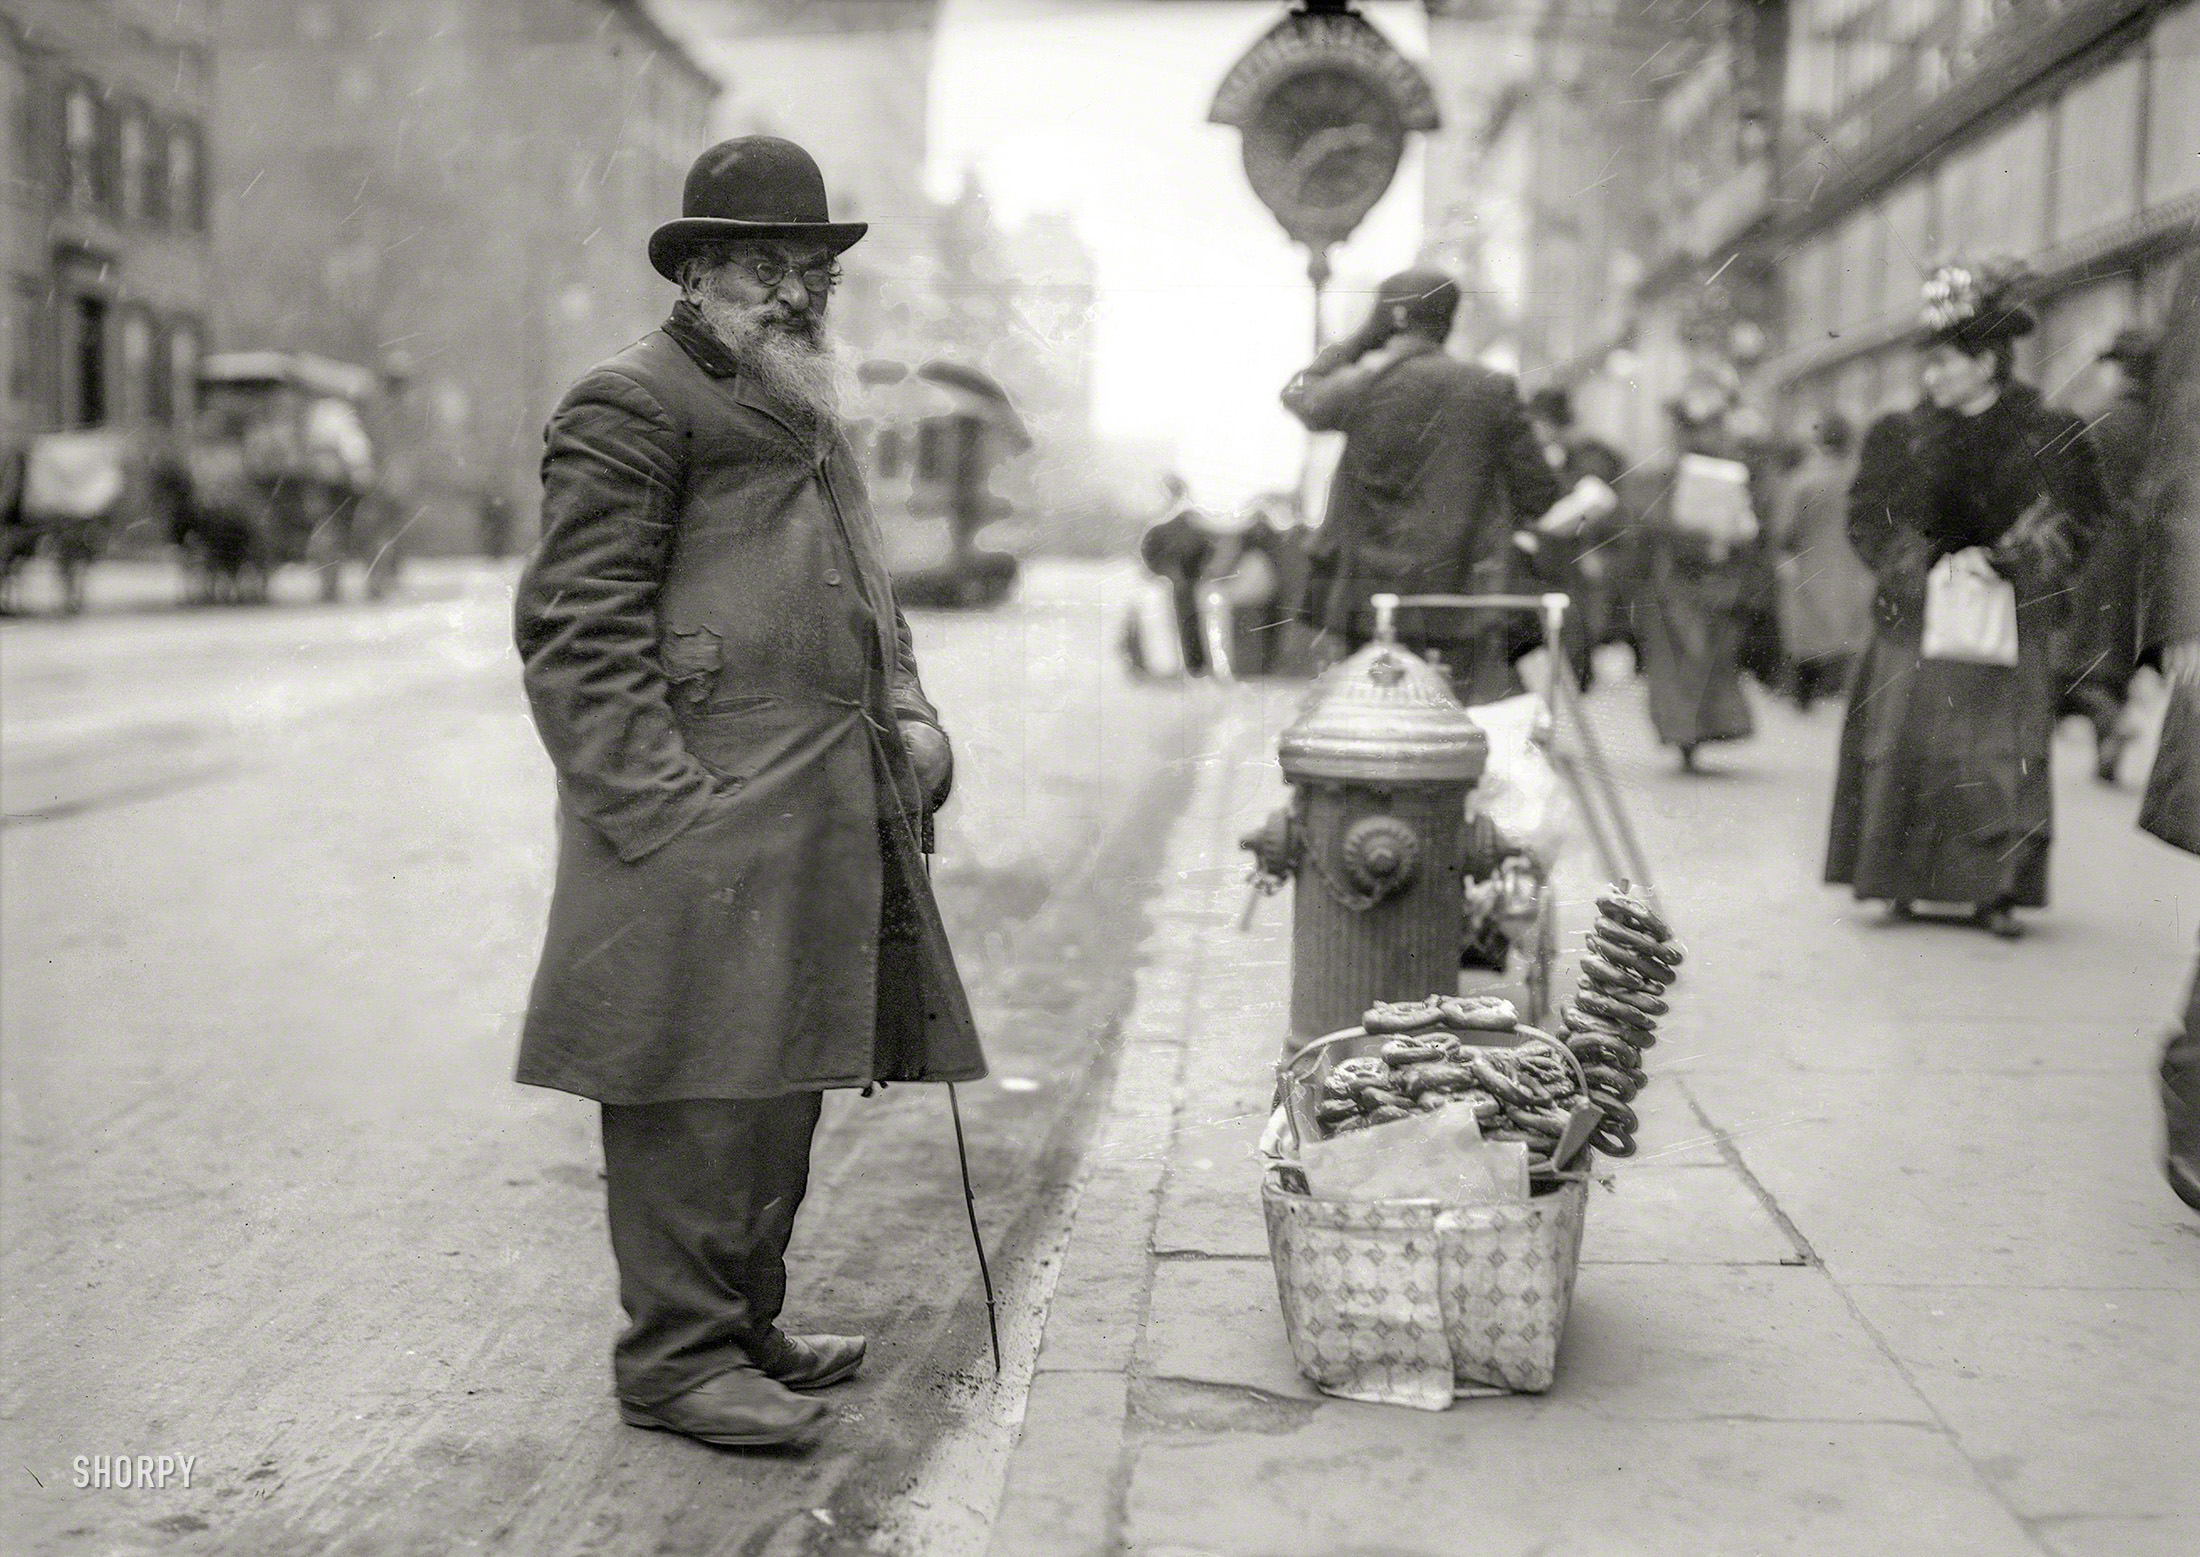 New York circa 1910. "Seller of pretzels, Sixth Avenue." With a dusting of salt and snow. 5x7 glass negative, George Grantham Bain Collection. View full size.